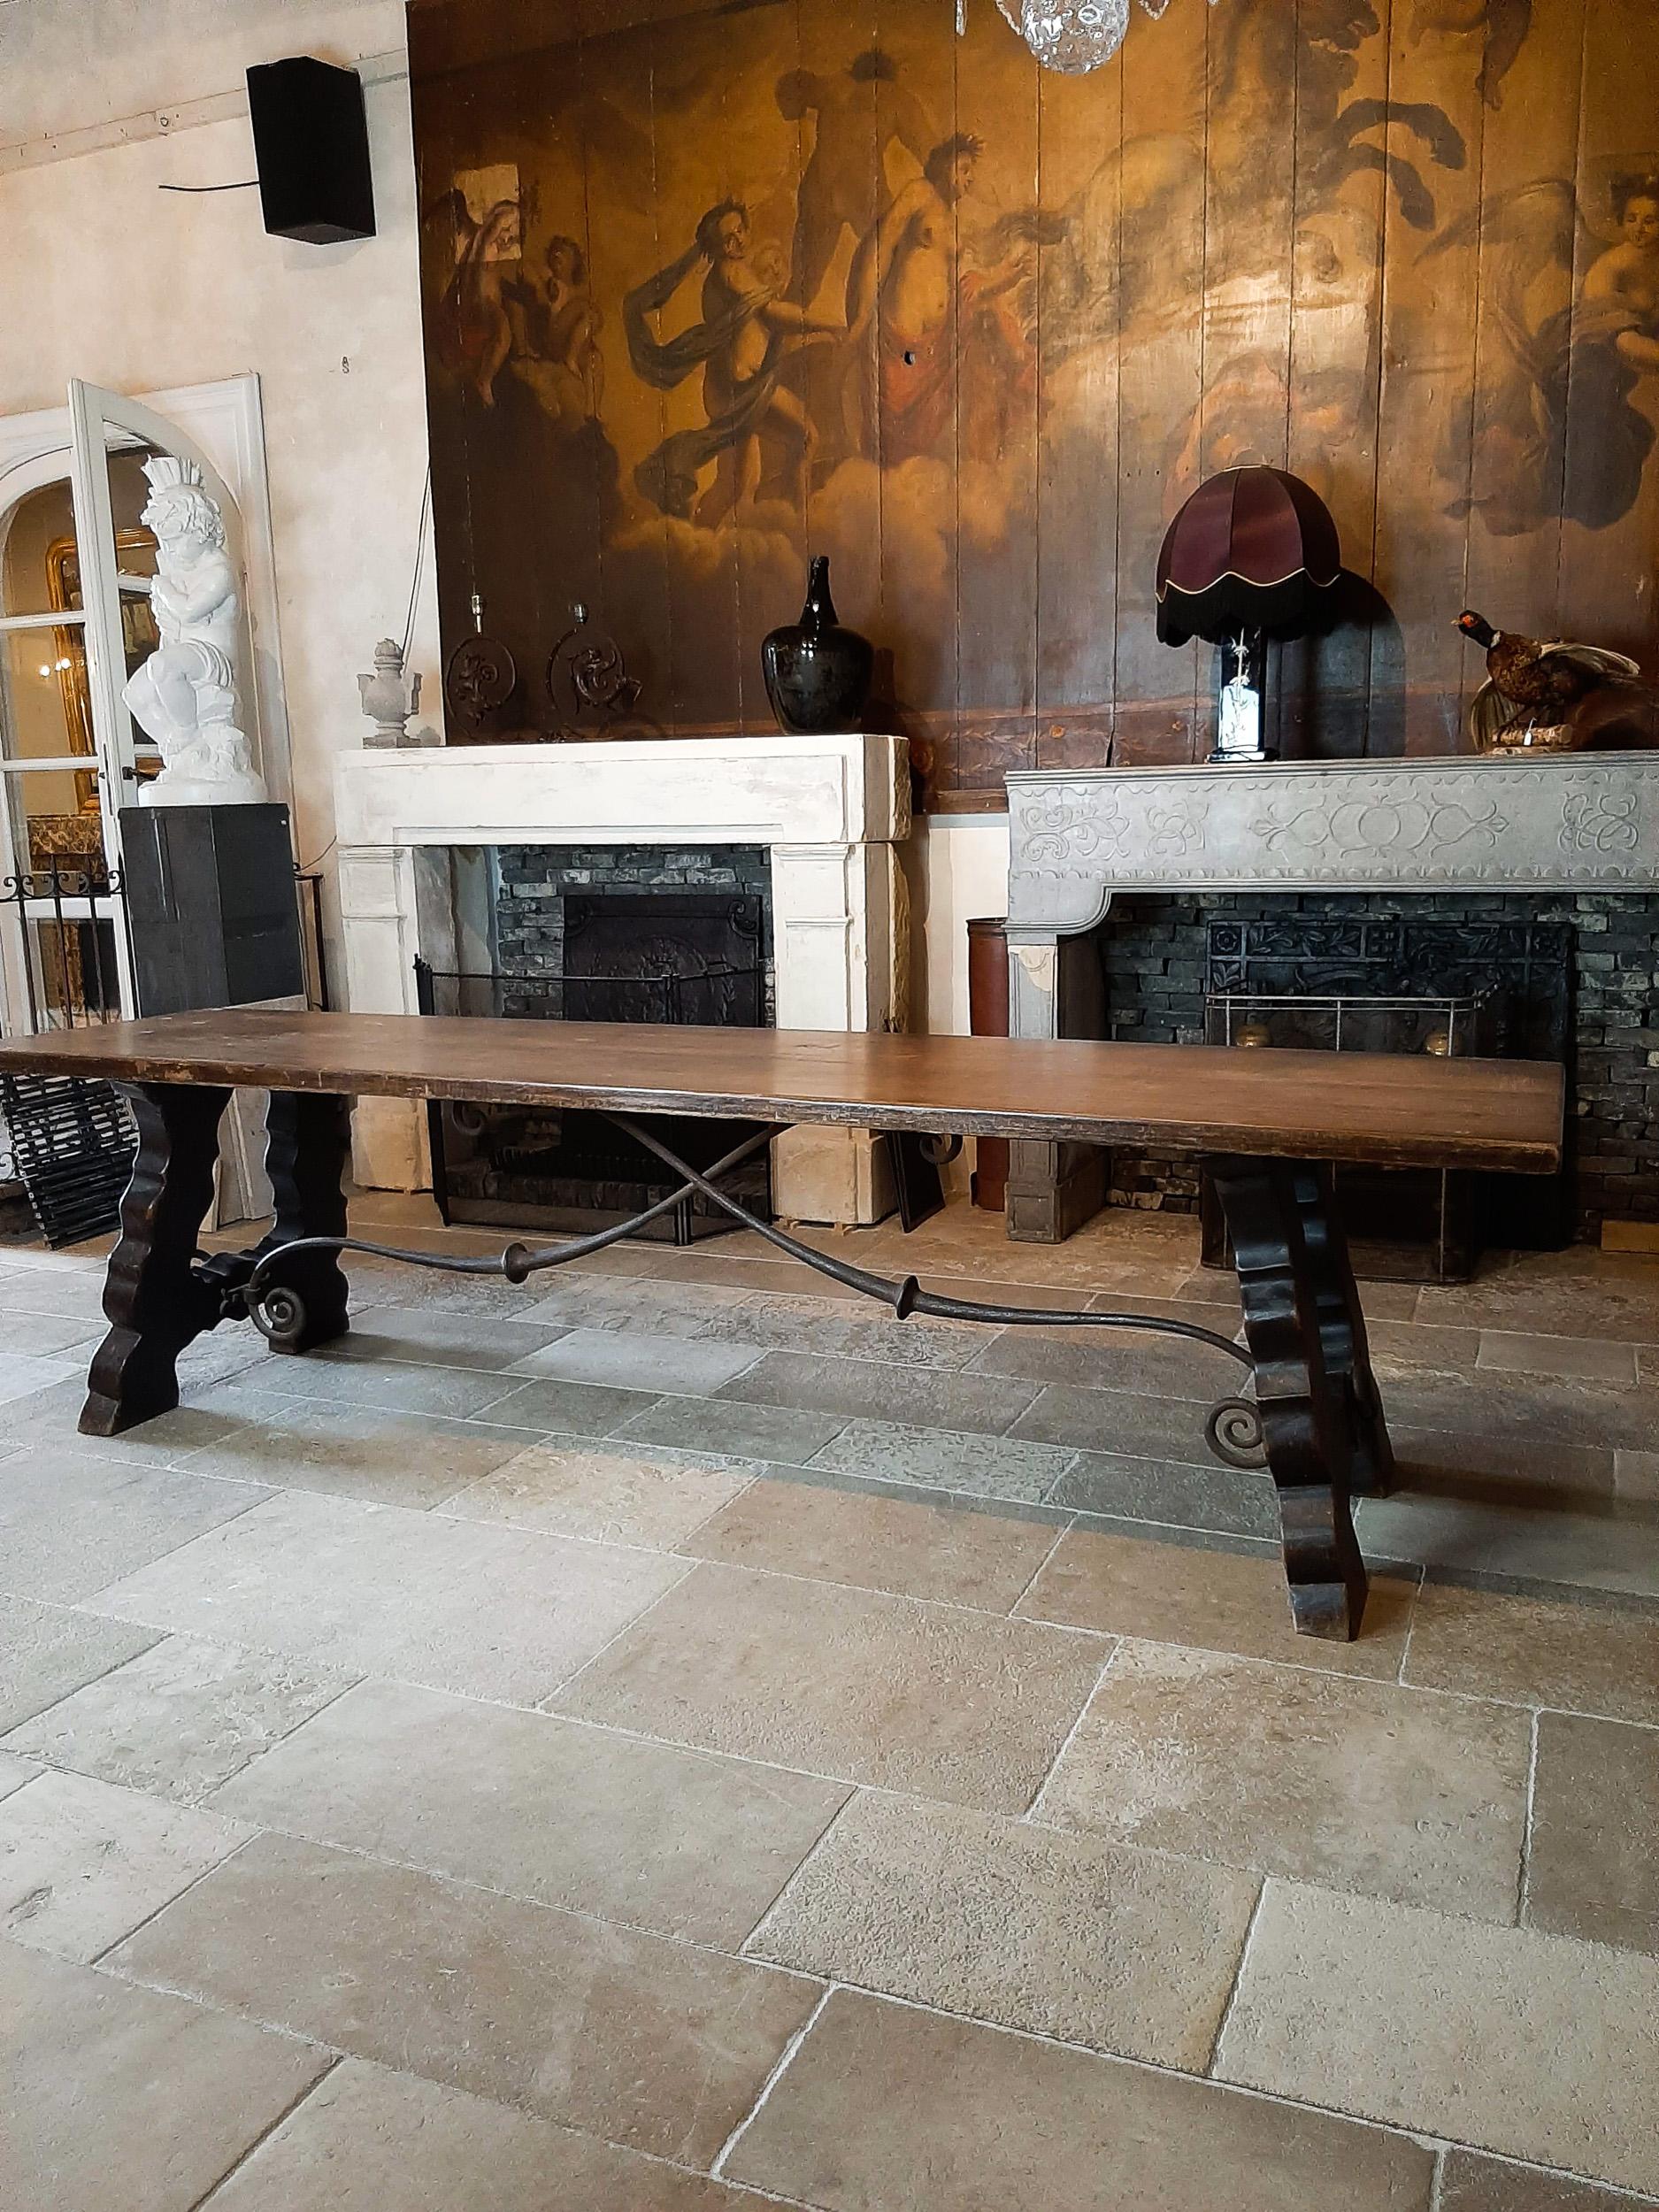 A sturdy and elegant large 19th century Spanish wooden dining table with worn patina and beautiful hand-forged iron supports in the base.

Spanish, Mexican, Cortijo Ibiza style.

This 19th century Spanish table is the perfect combination of